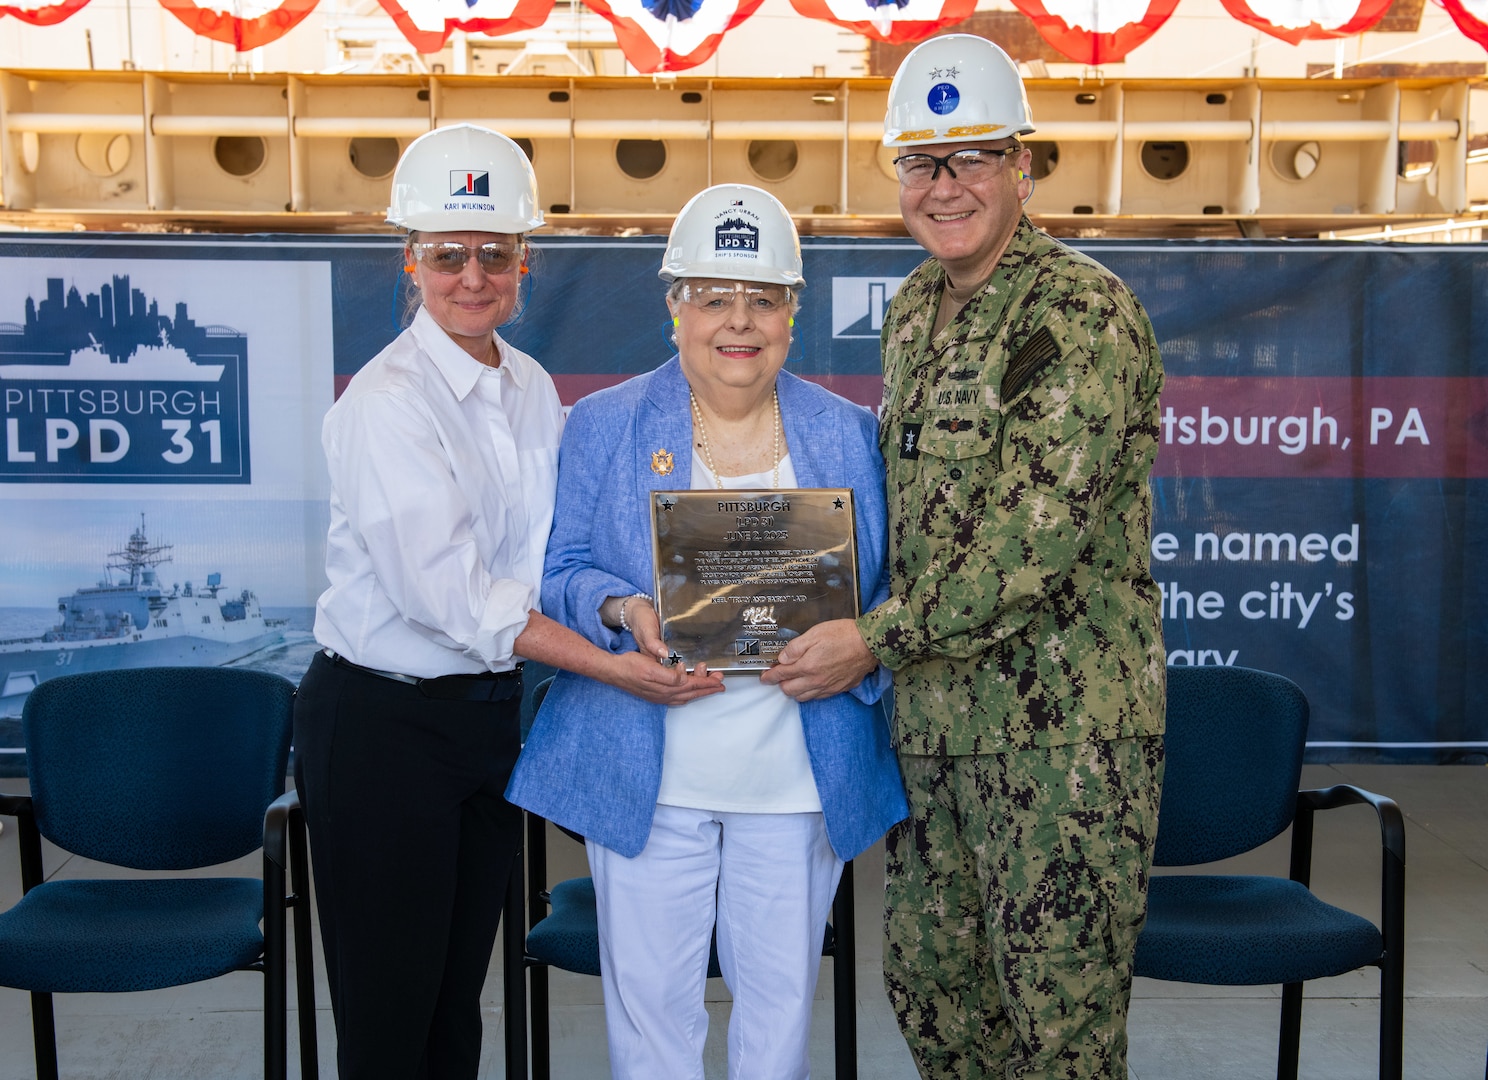 Keel Authentication ceremony of LPD 31 Pittsburgh, held at Ingalls Shipbuilding in Pascagoula, Mississippi. Pictured is Kari Wilkinson; president of Ingalls Shipbuilding, Rear Admiral Thomas J. Anderson, and ship sponsor Nancy Urban.